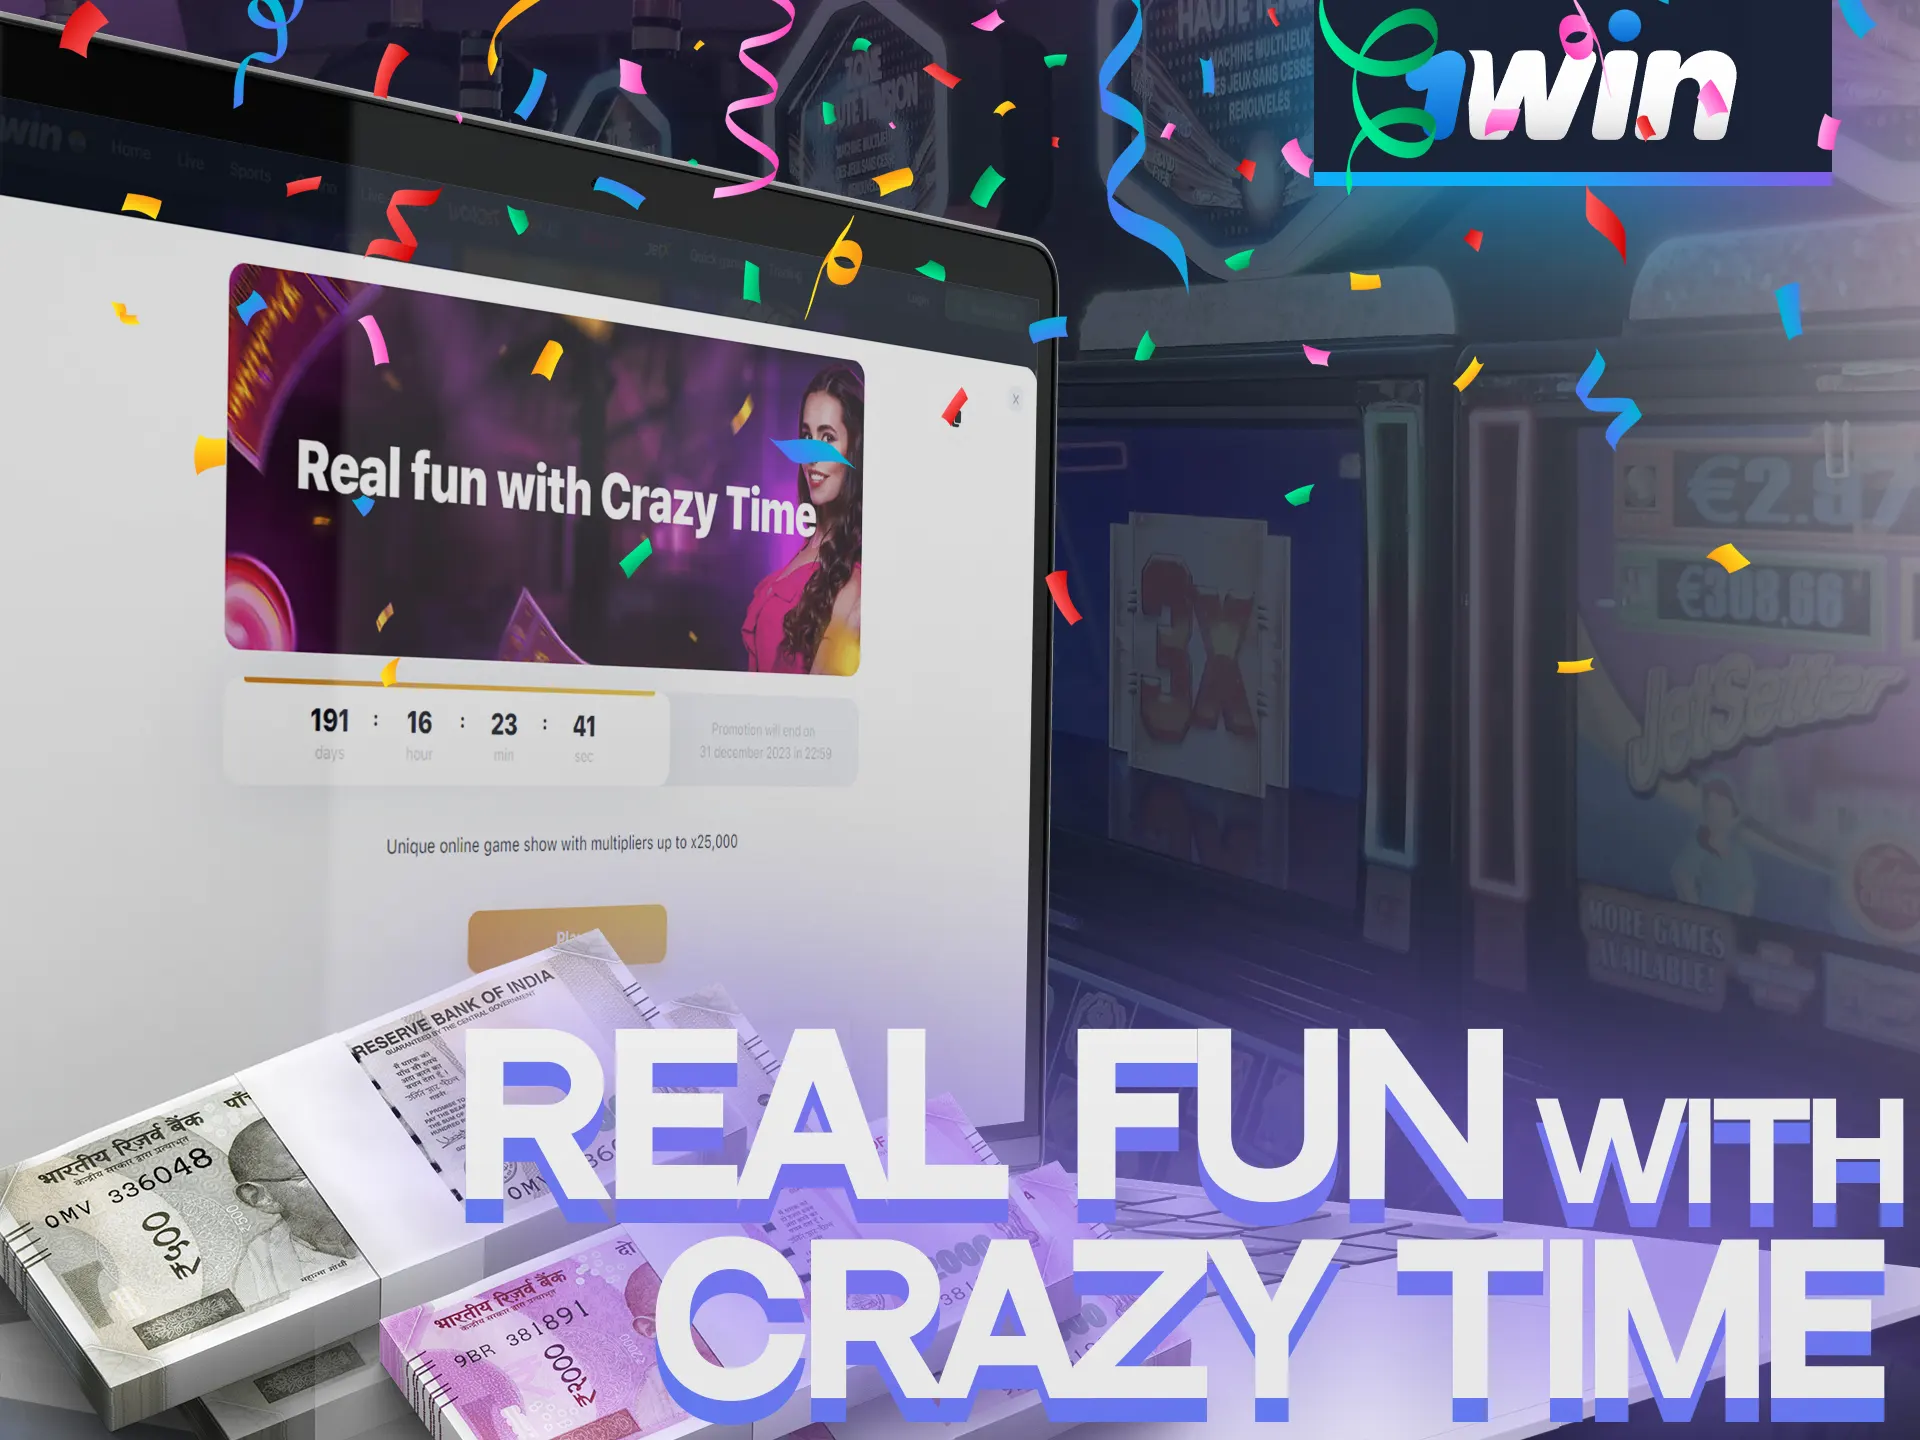 Get real fun with crazy time with 1Win.